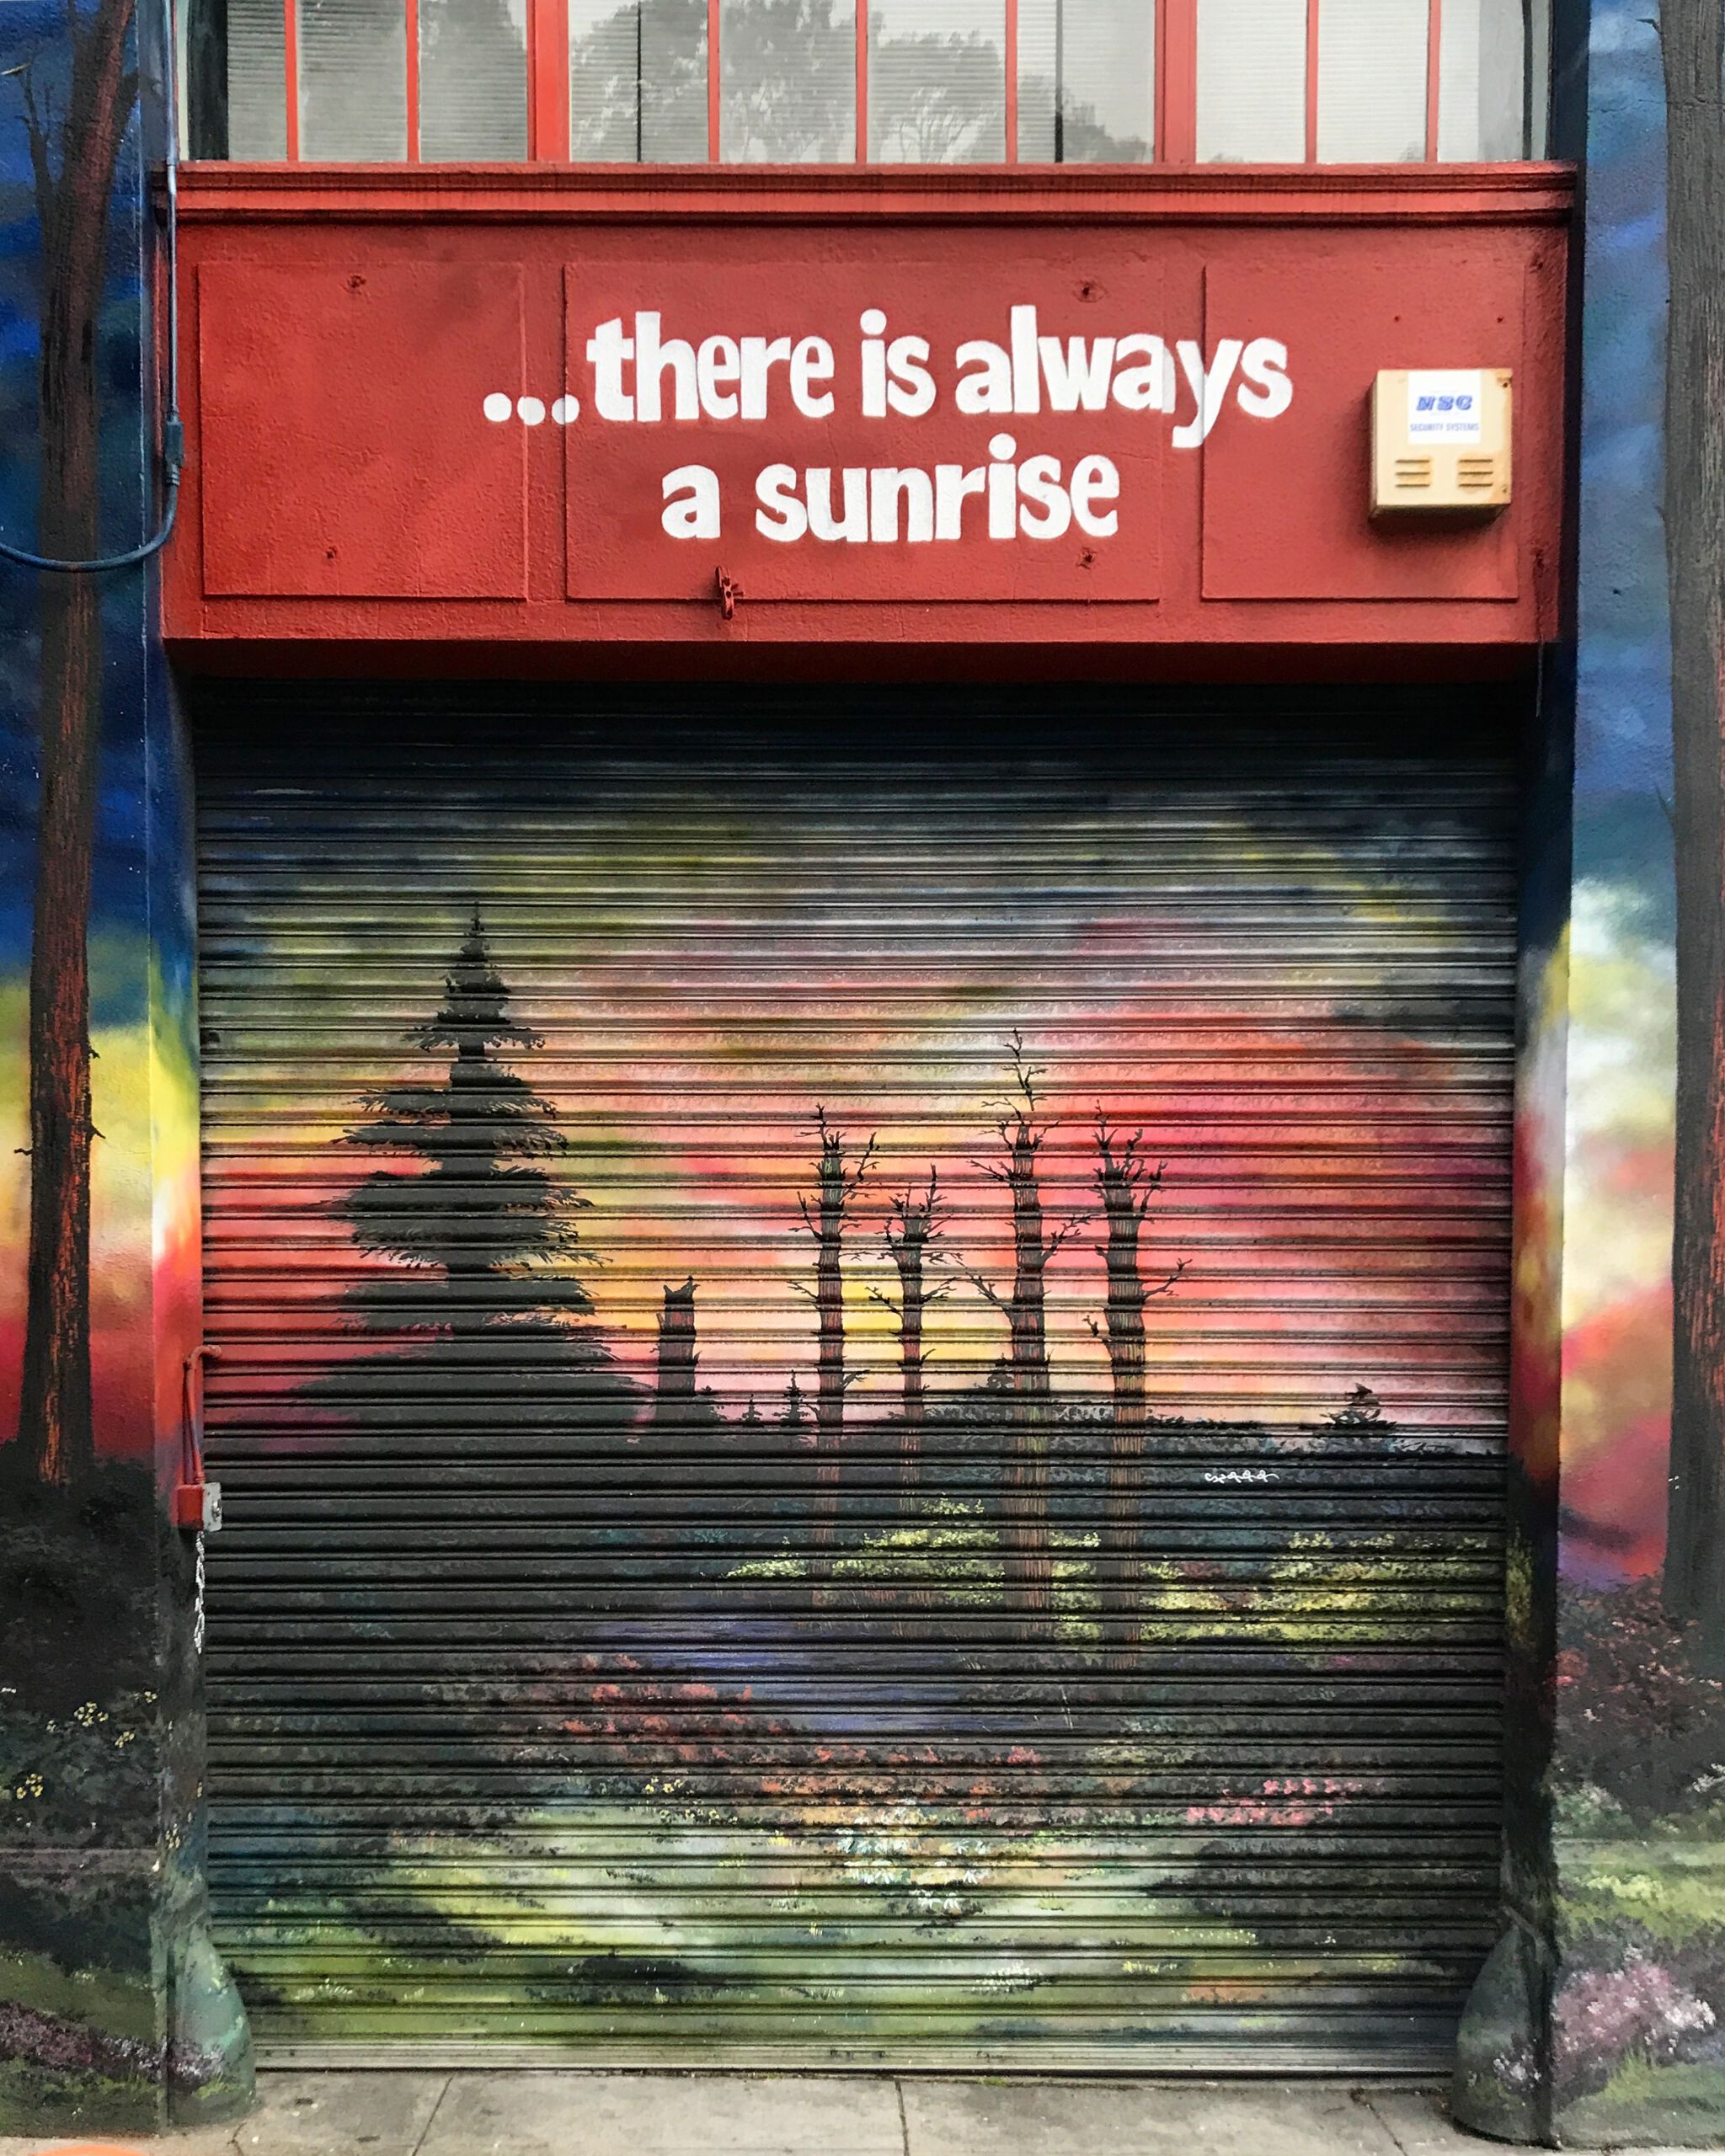 &mdash;There is Always Sunrise